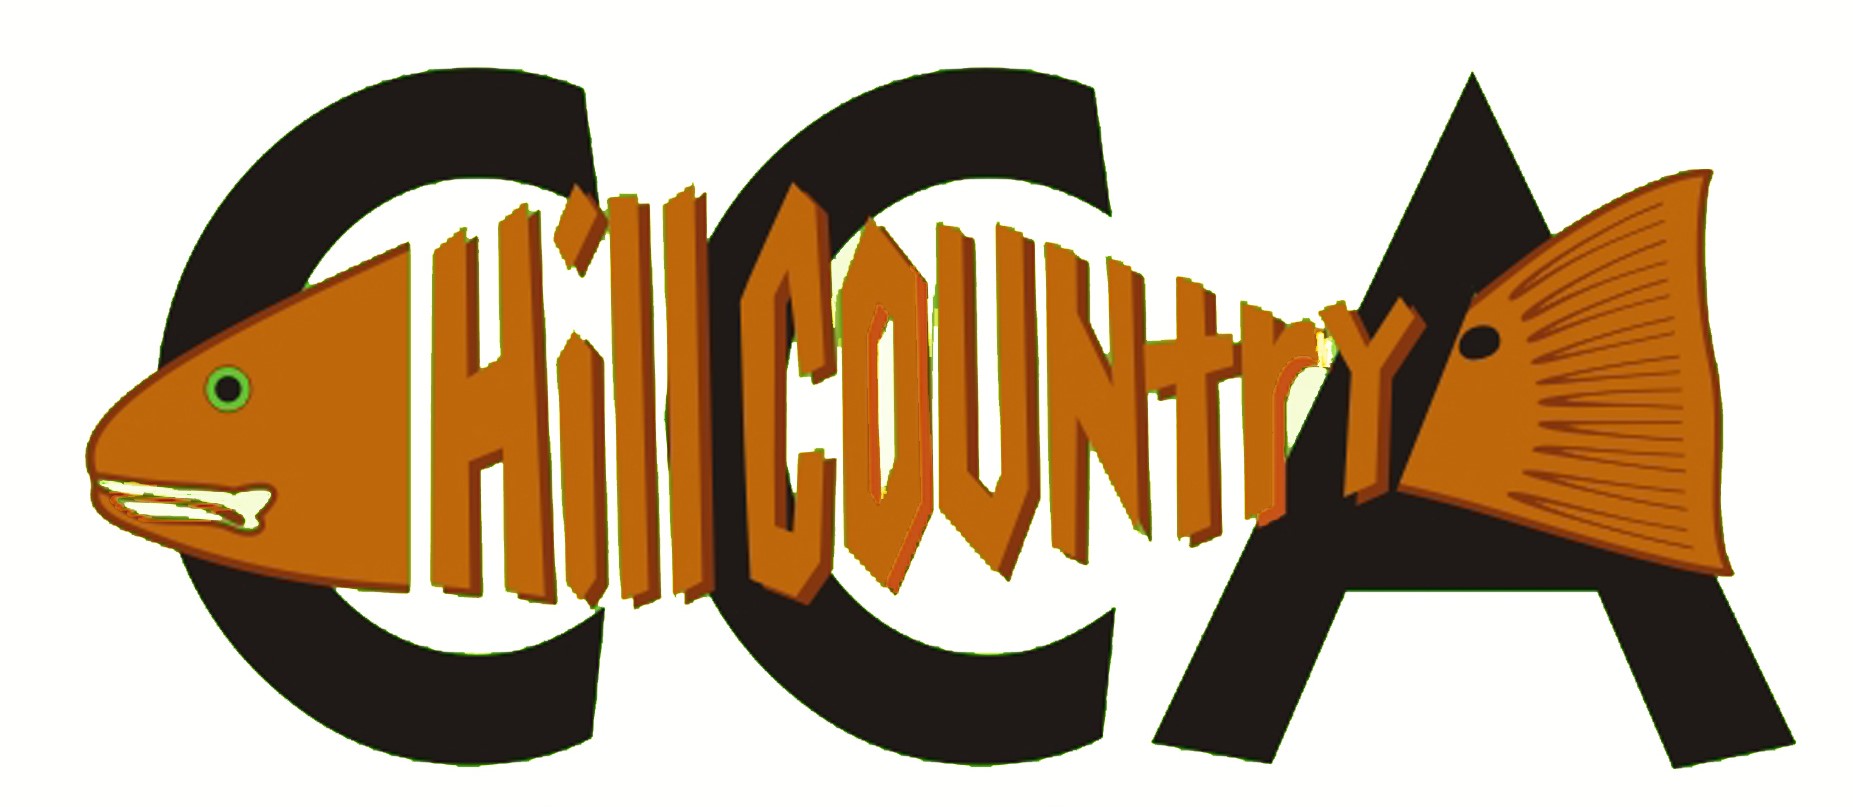 2016 Hill Country Logo